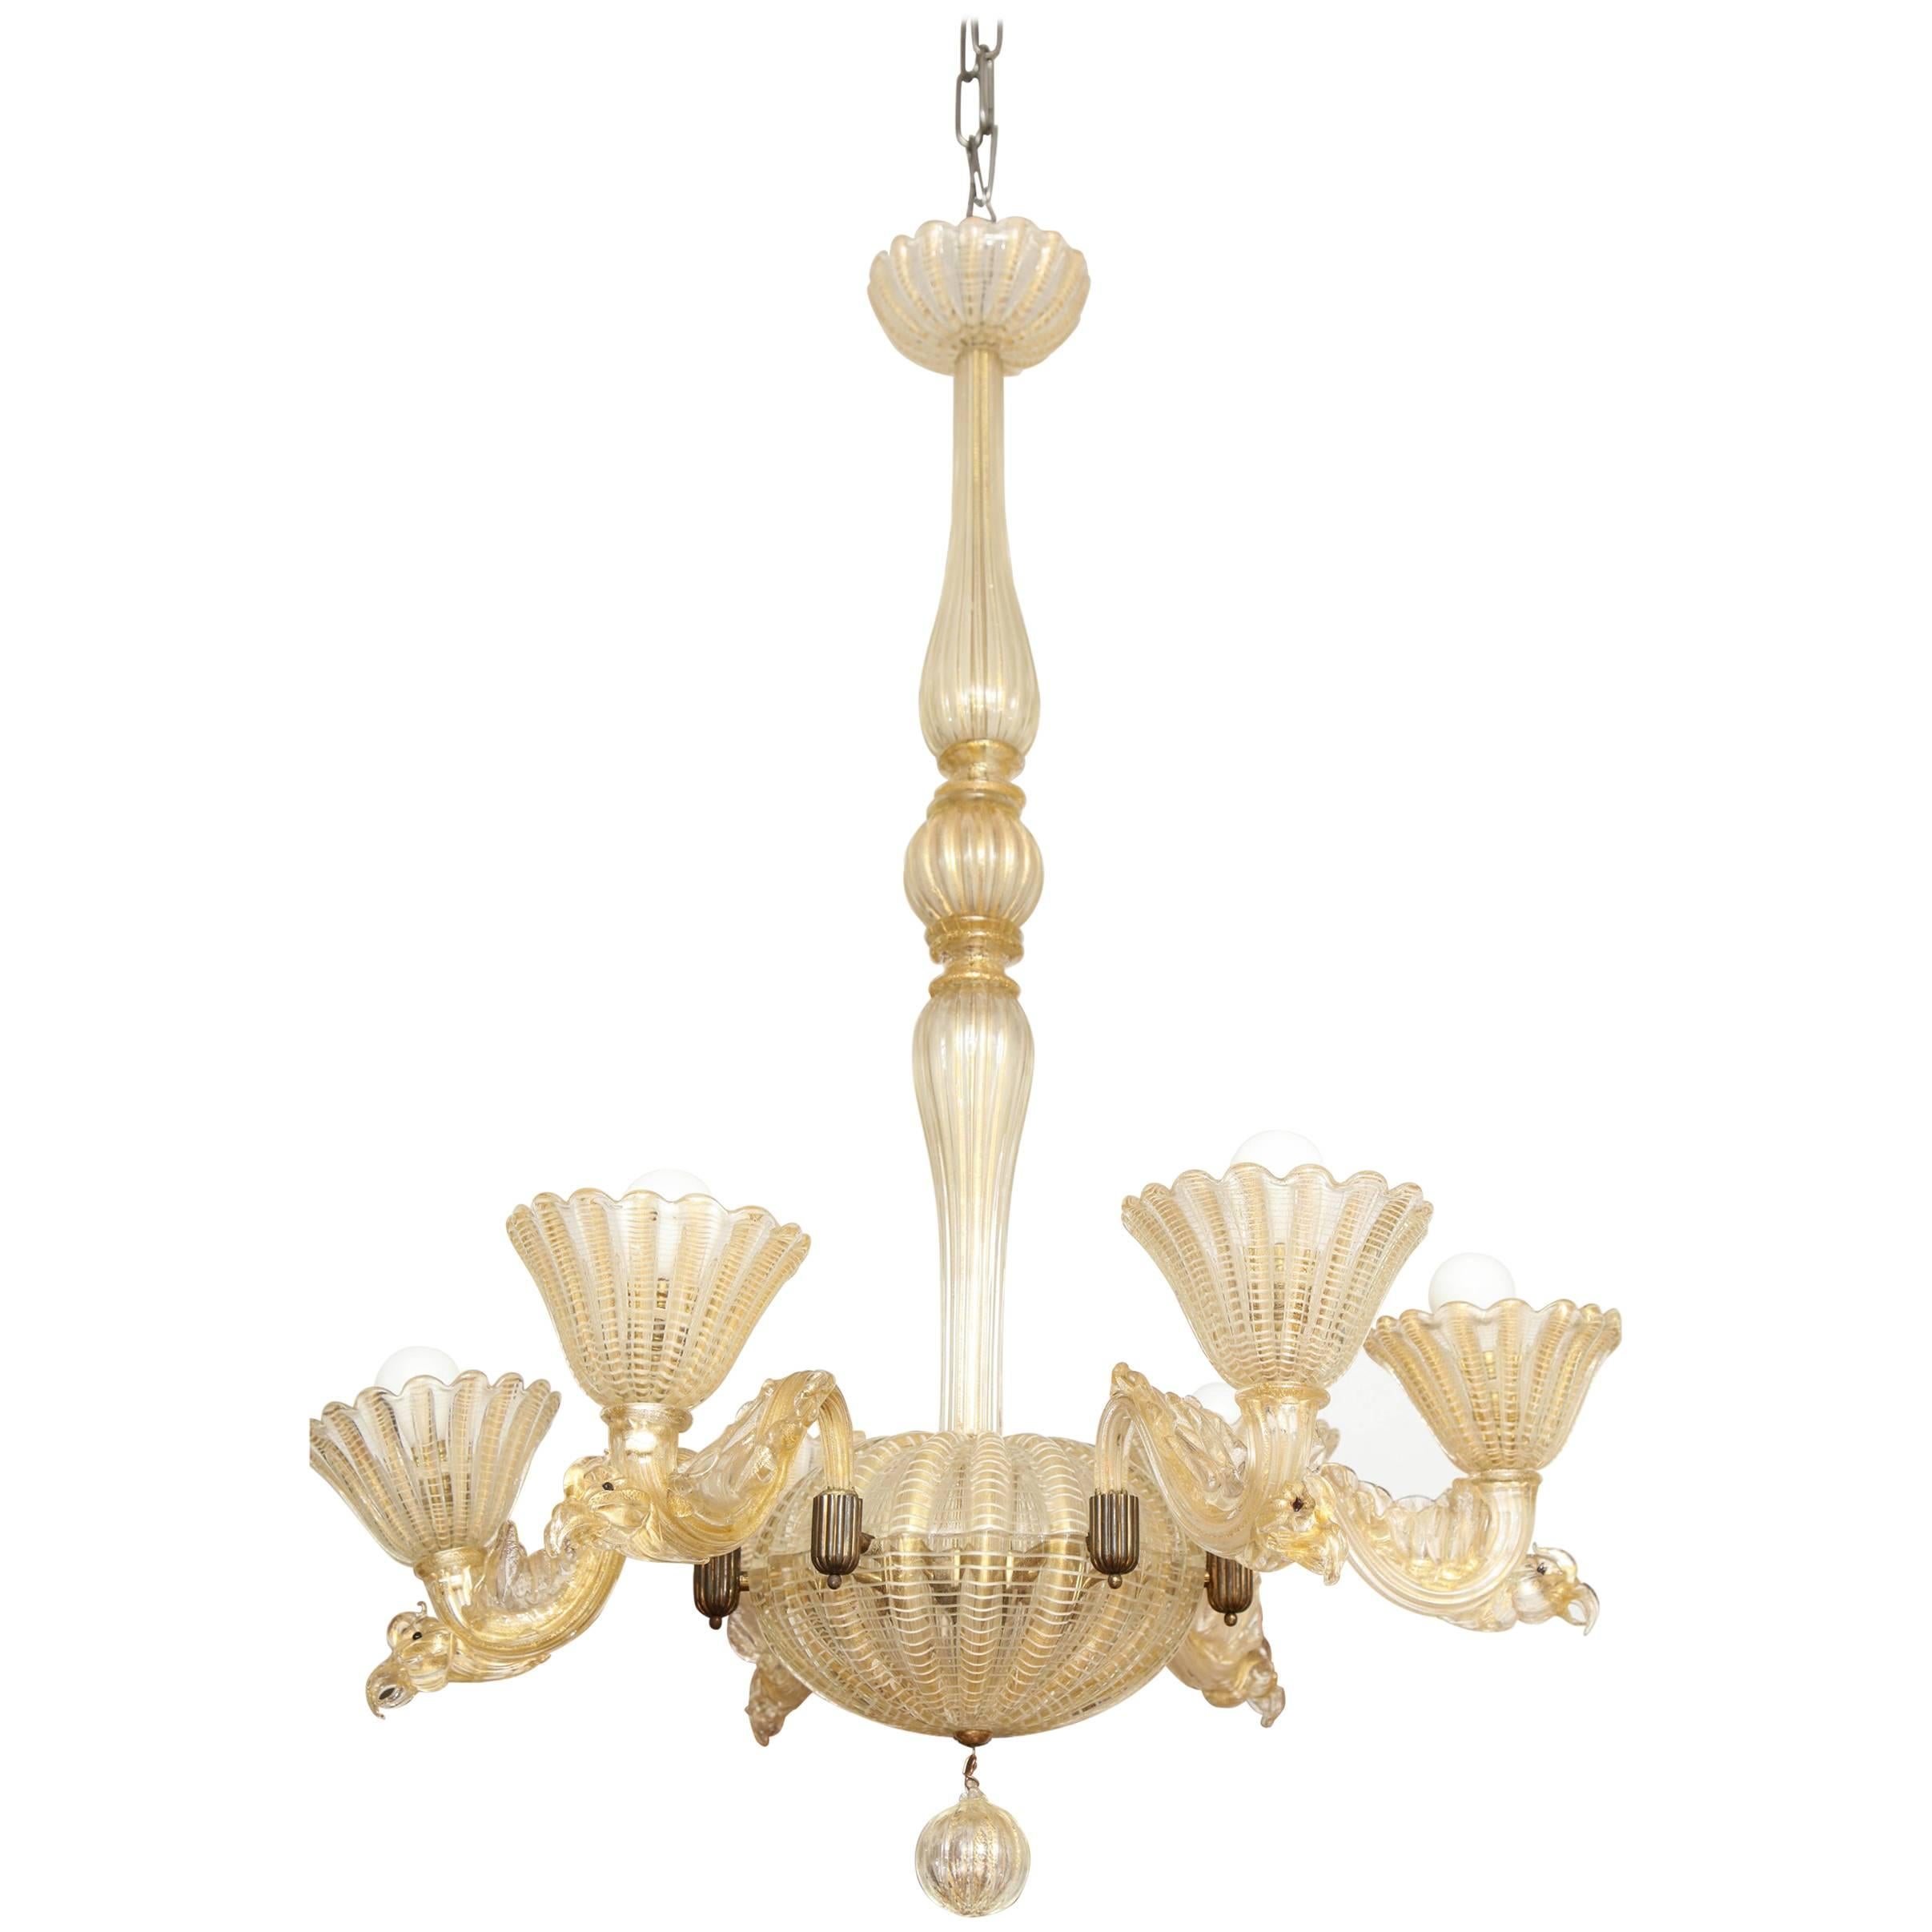 Barovier & Toso Chandelier Made in Venice, 1935 For Sale